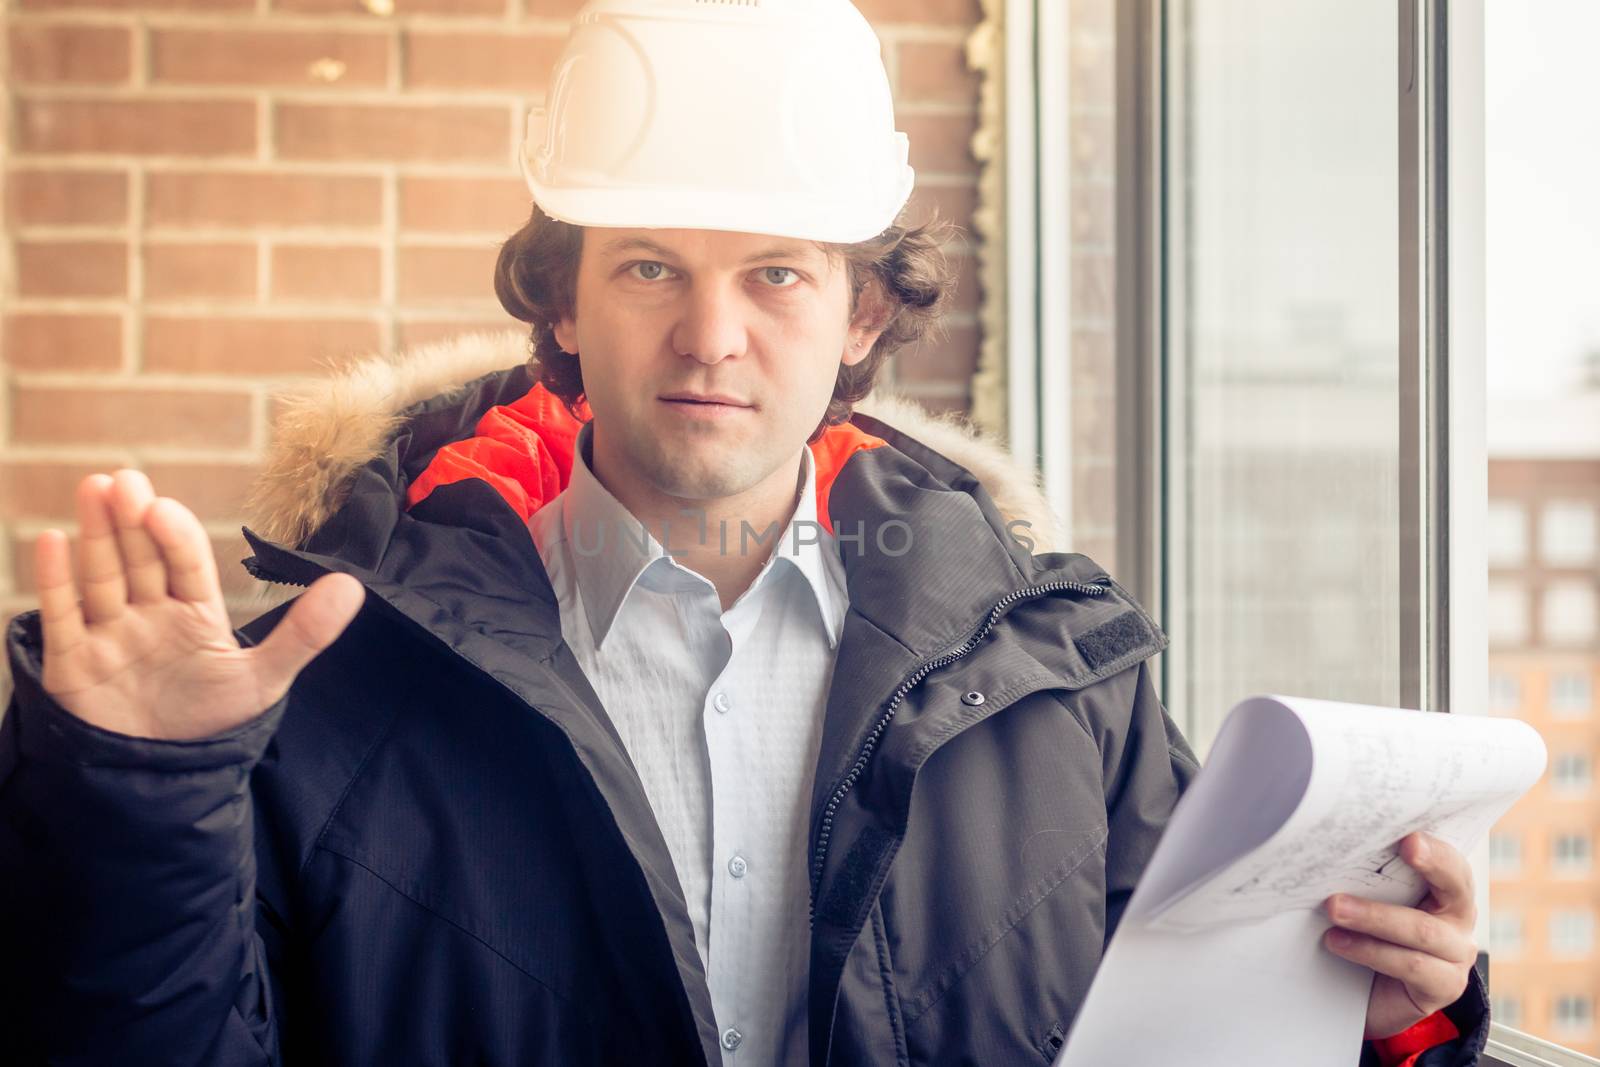 An angry disgruntled builder worker in a helmet with project drawings plans in his one hand and mobile phone in another hand screams on someone. Bad executed work. Aggressive man. Soft focus, toned